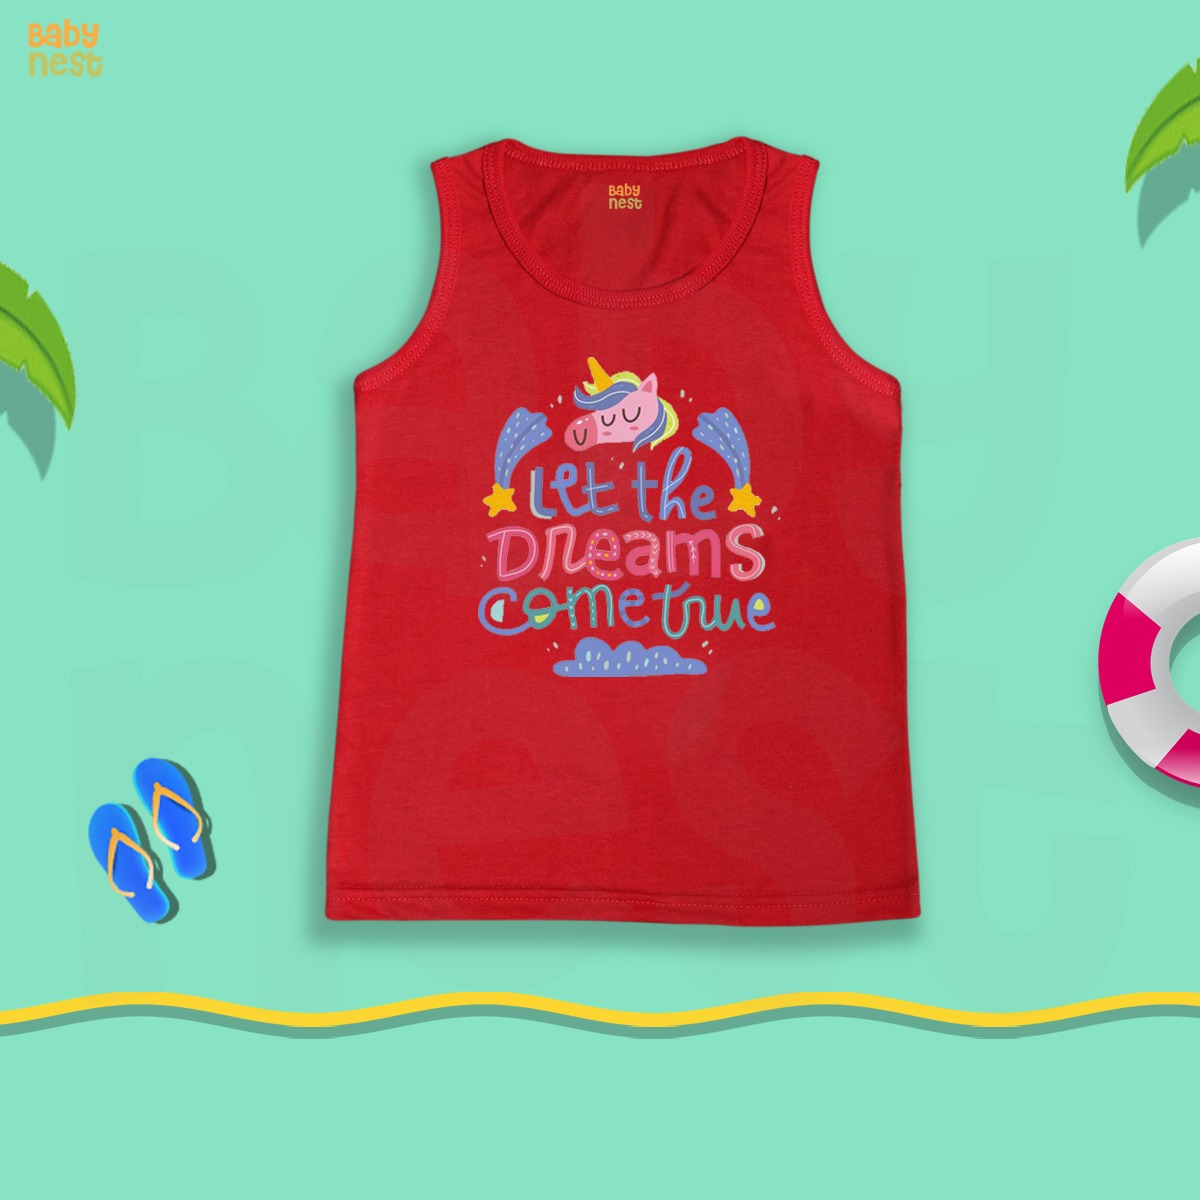 BNBBS-95 – Let The Dreams Come True Print Sandos for Kids – Red